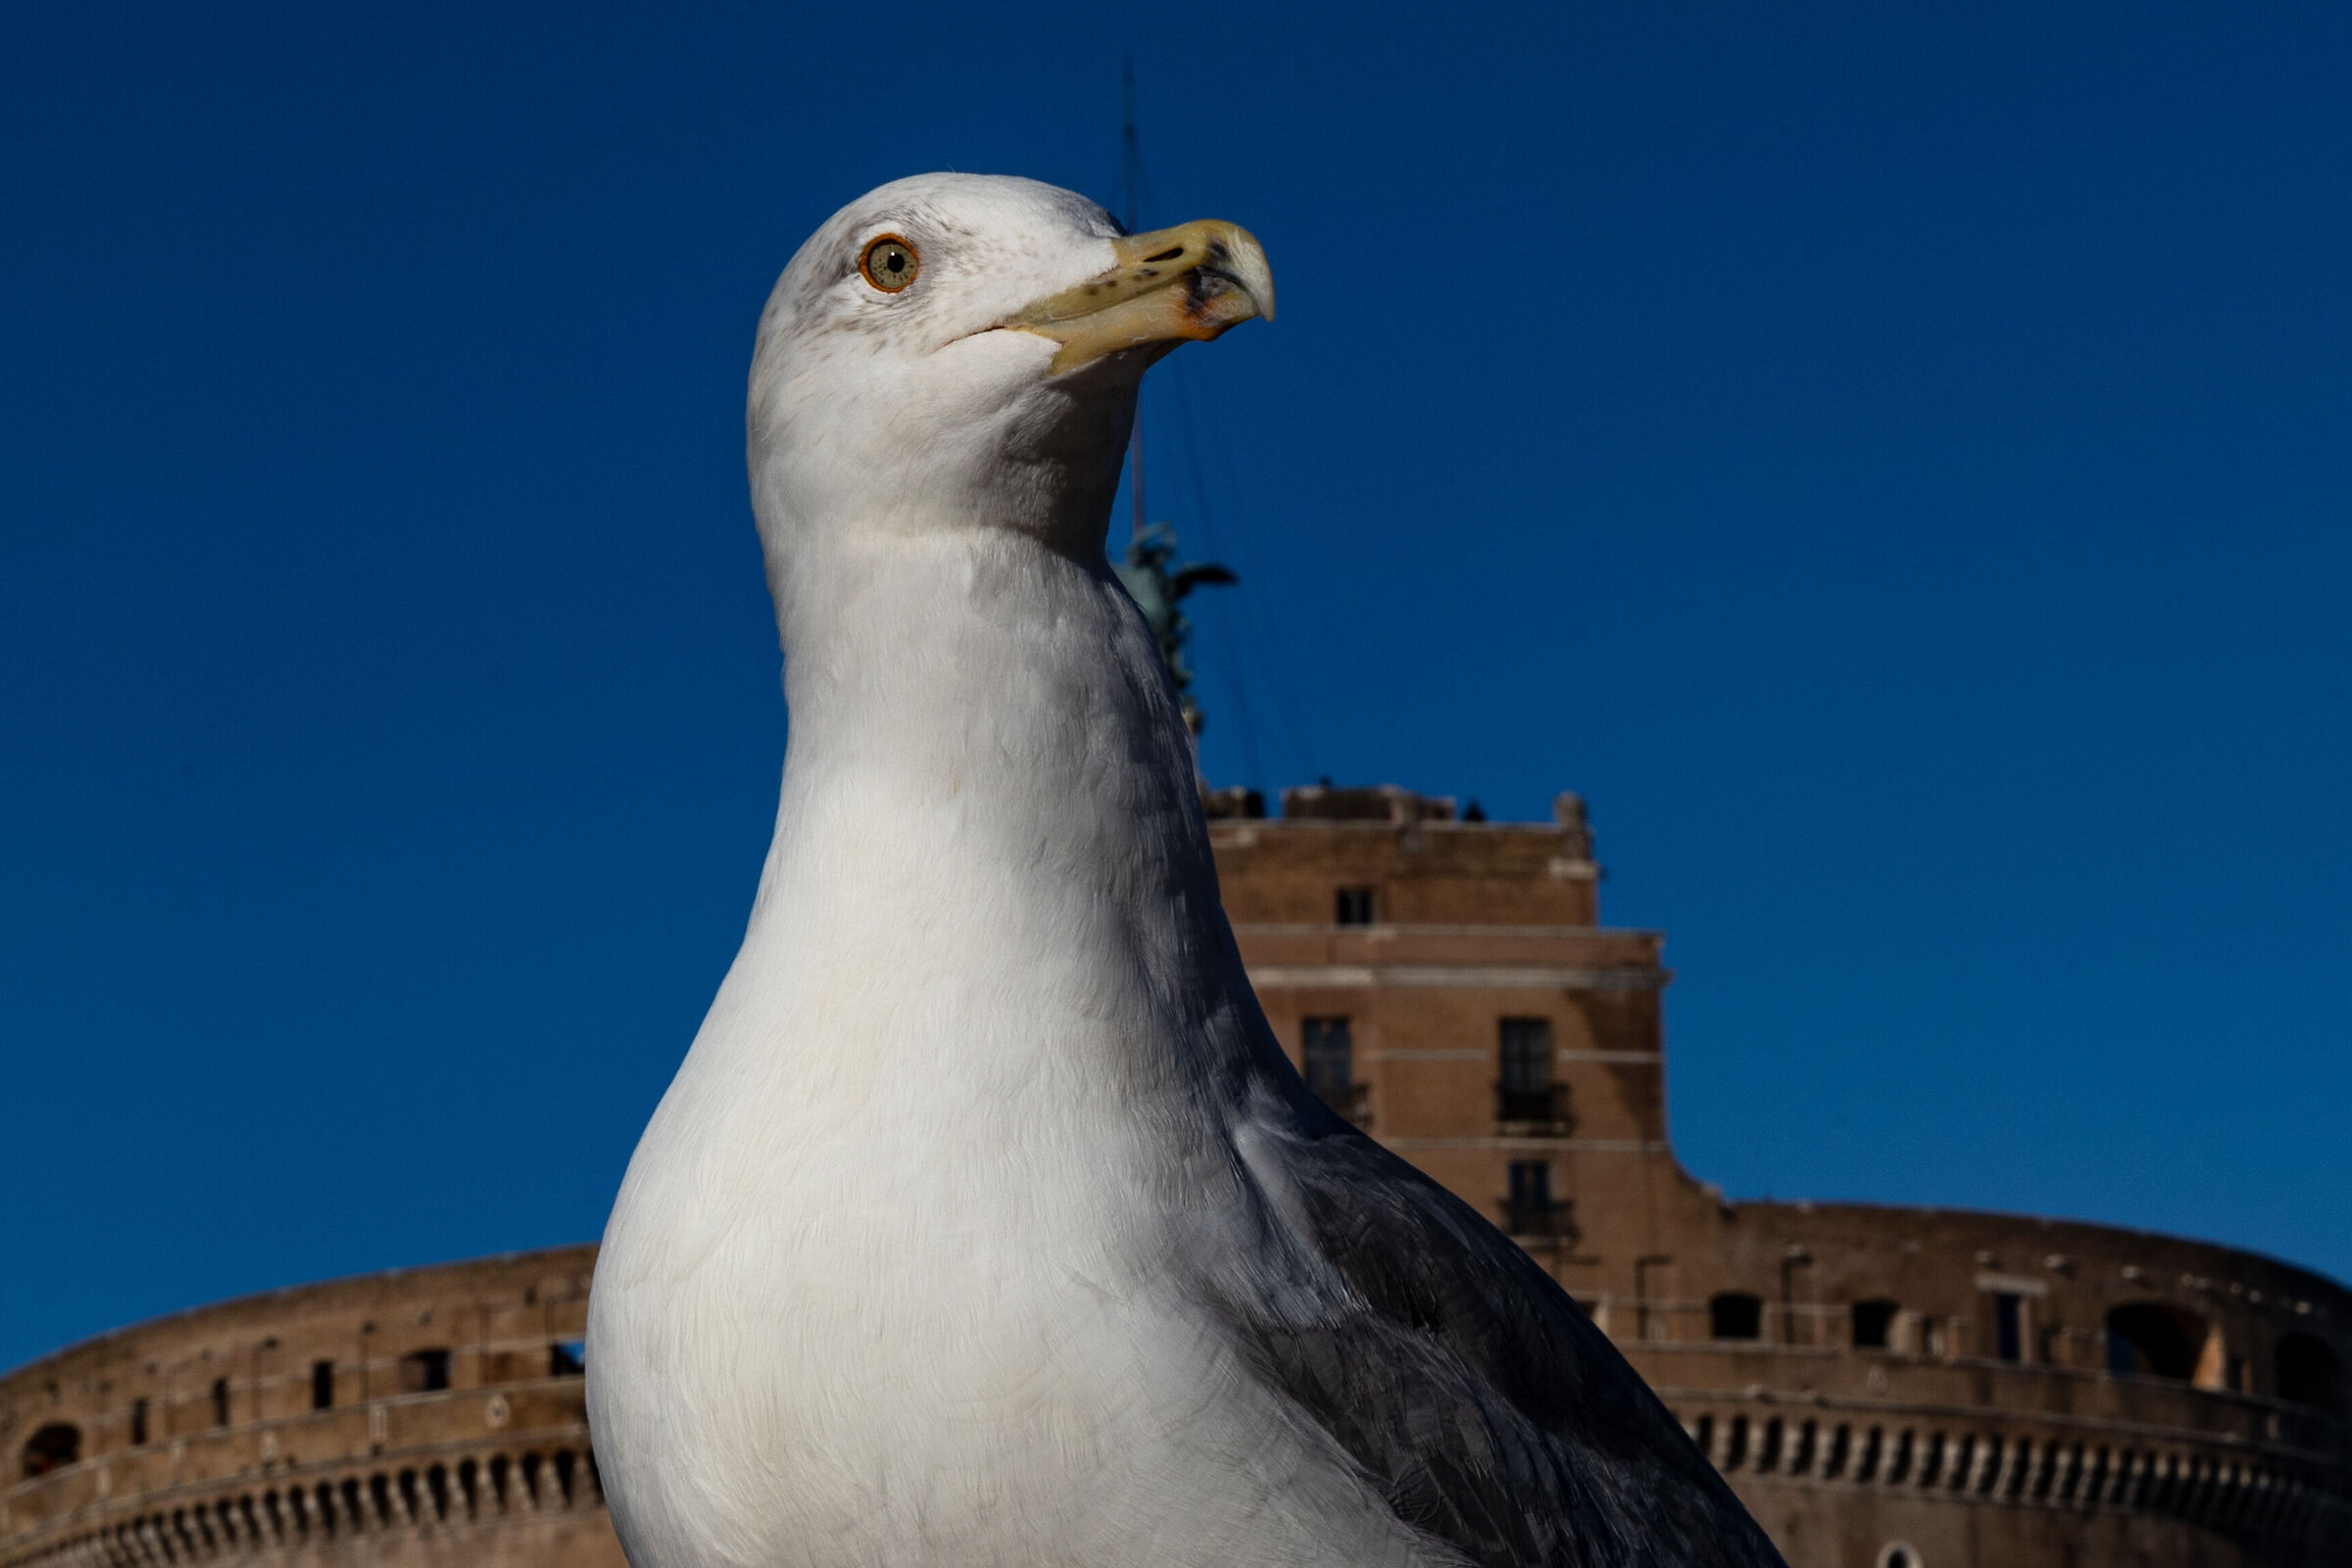 The seagull and the castle...